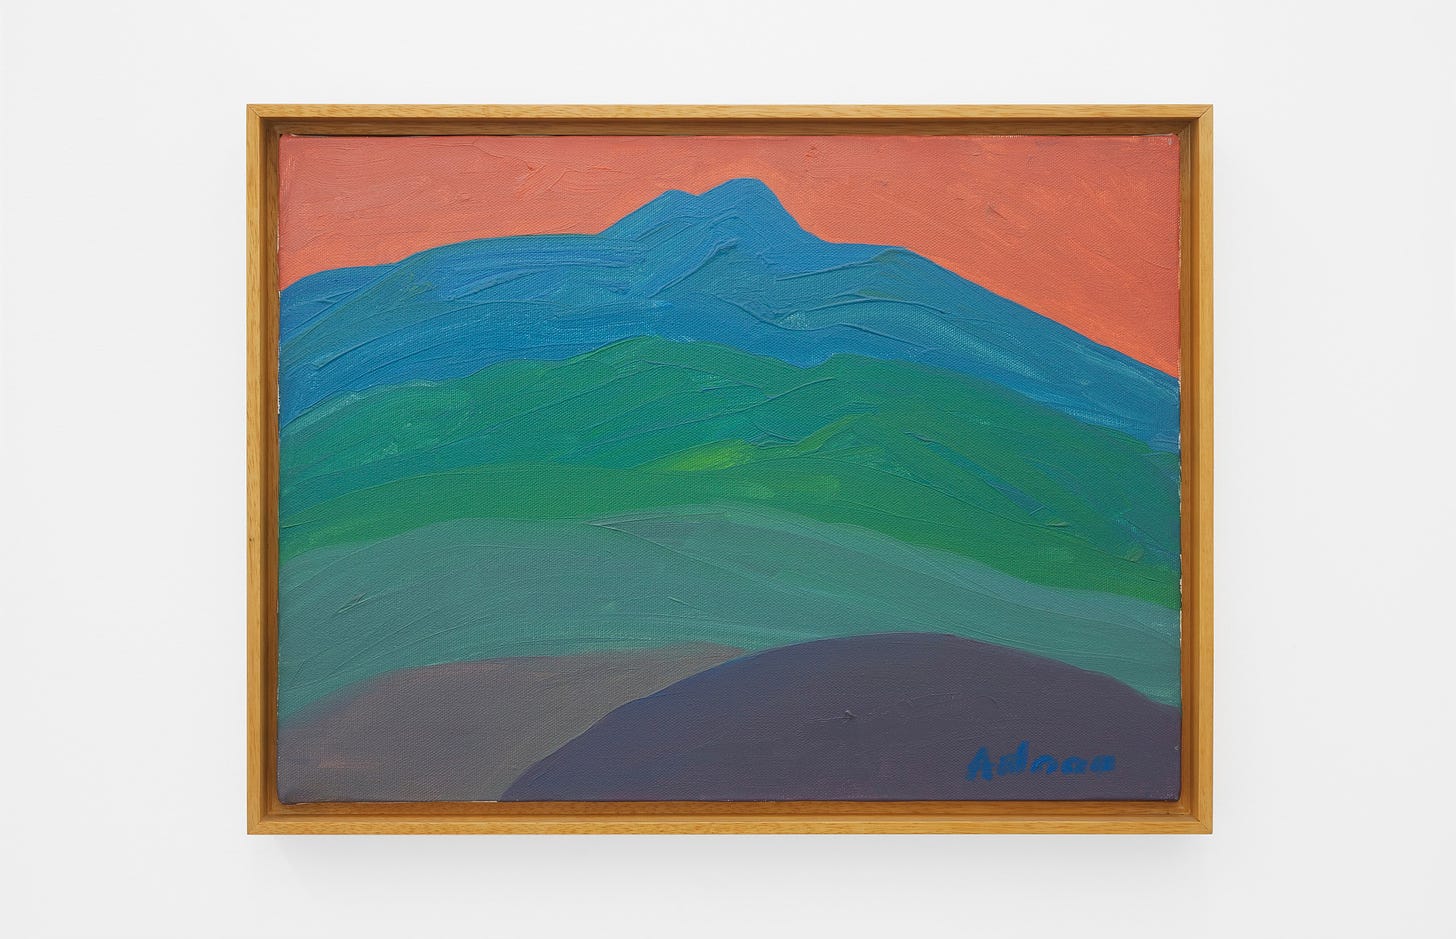 A painting with layered blocks of color suggesting the form of Mount Tamalpais. The mountain is depicted in curved bands in colors ranging from a dark plum, through greens to a vivid blue at the top of the mountain. Behind the mountain the sky is a deep orange-red. 